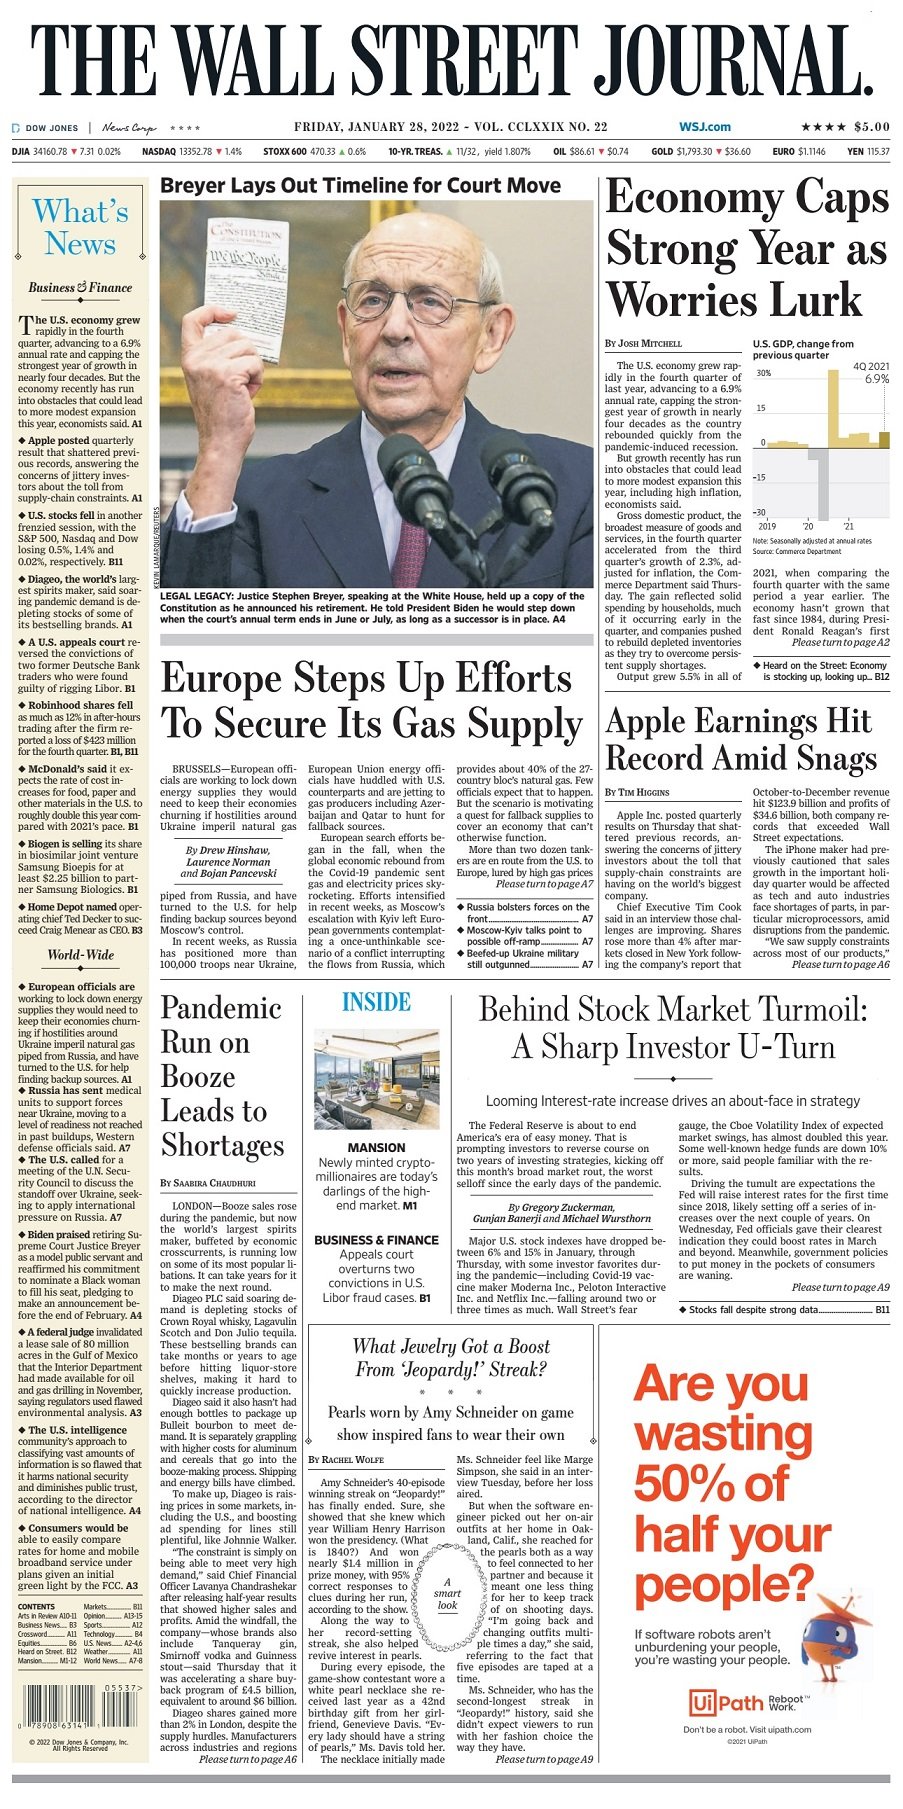 Download The Wall Street Journal January 28, 2022 SoftArchive